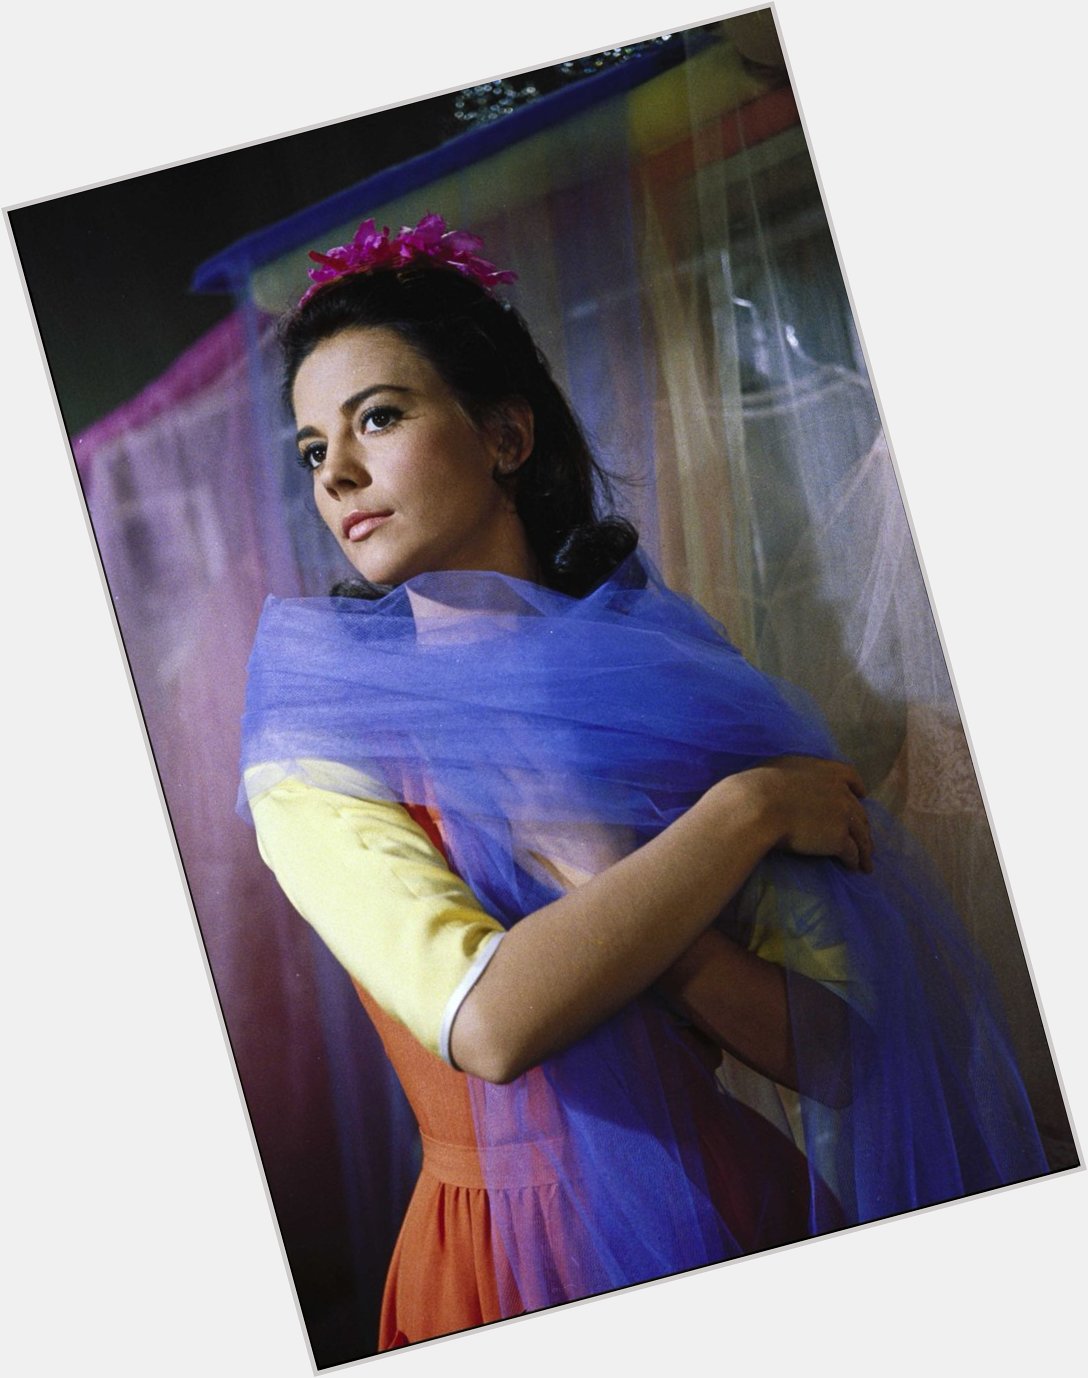 Happy Birthday Natalie Wood! What is your favorite role of hers? We love Maria in West Side Story! 